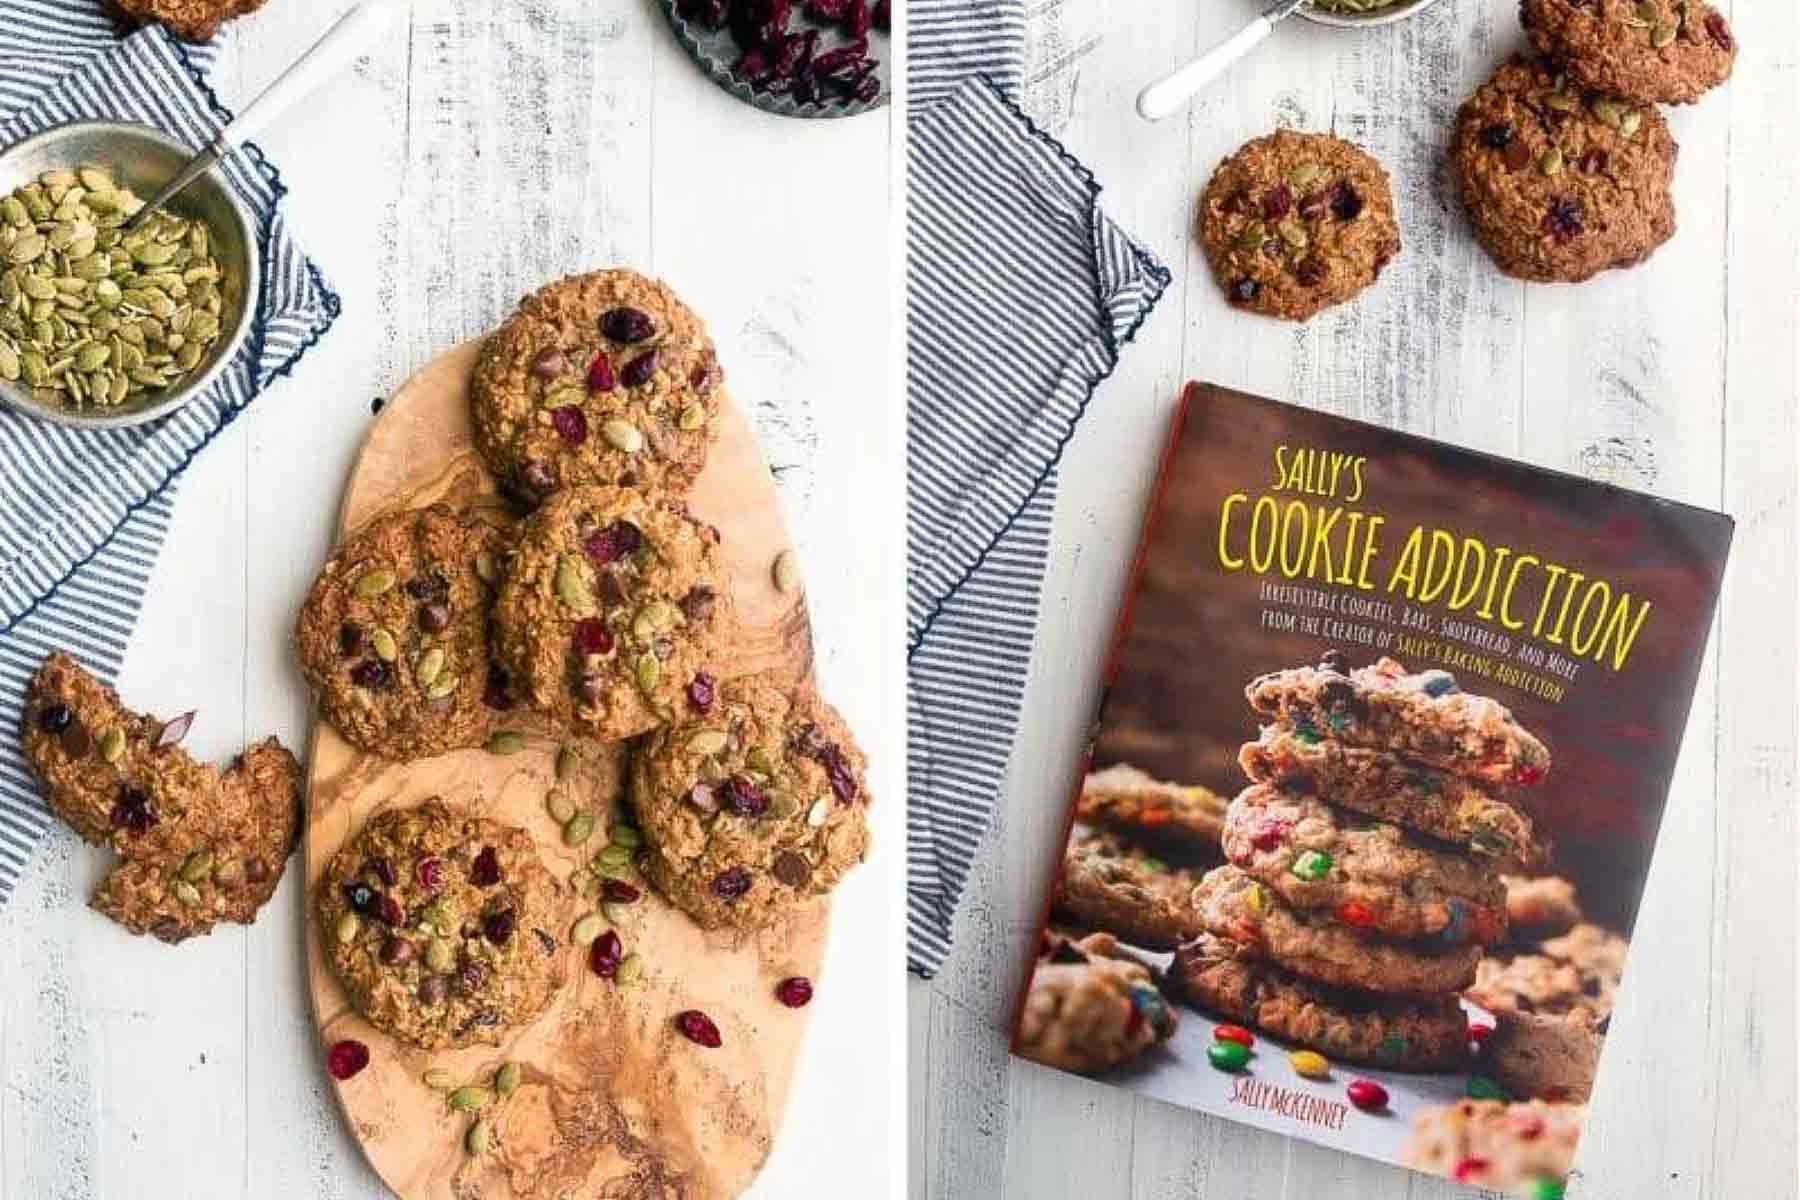 Collage photo of cookbook on right and baked dessert on left.